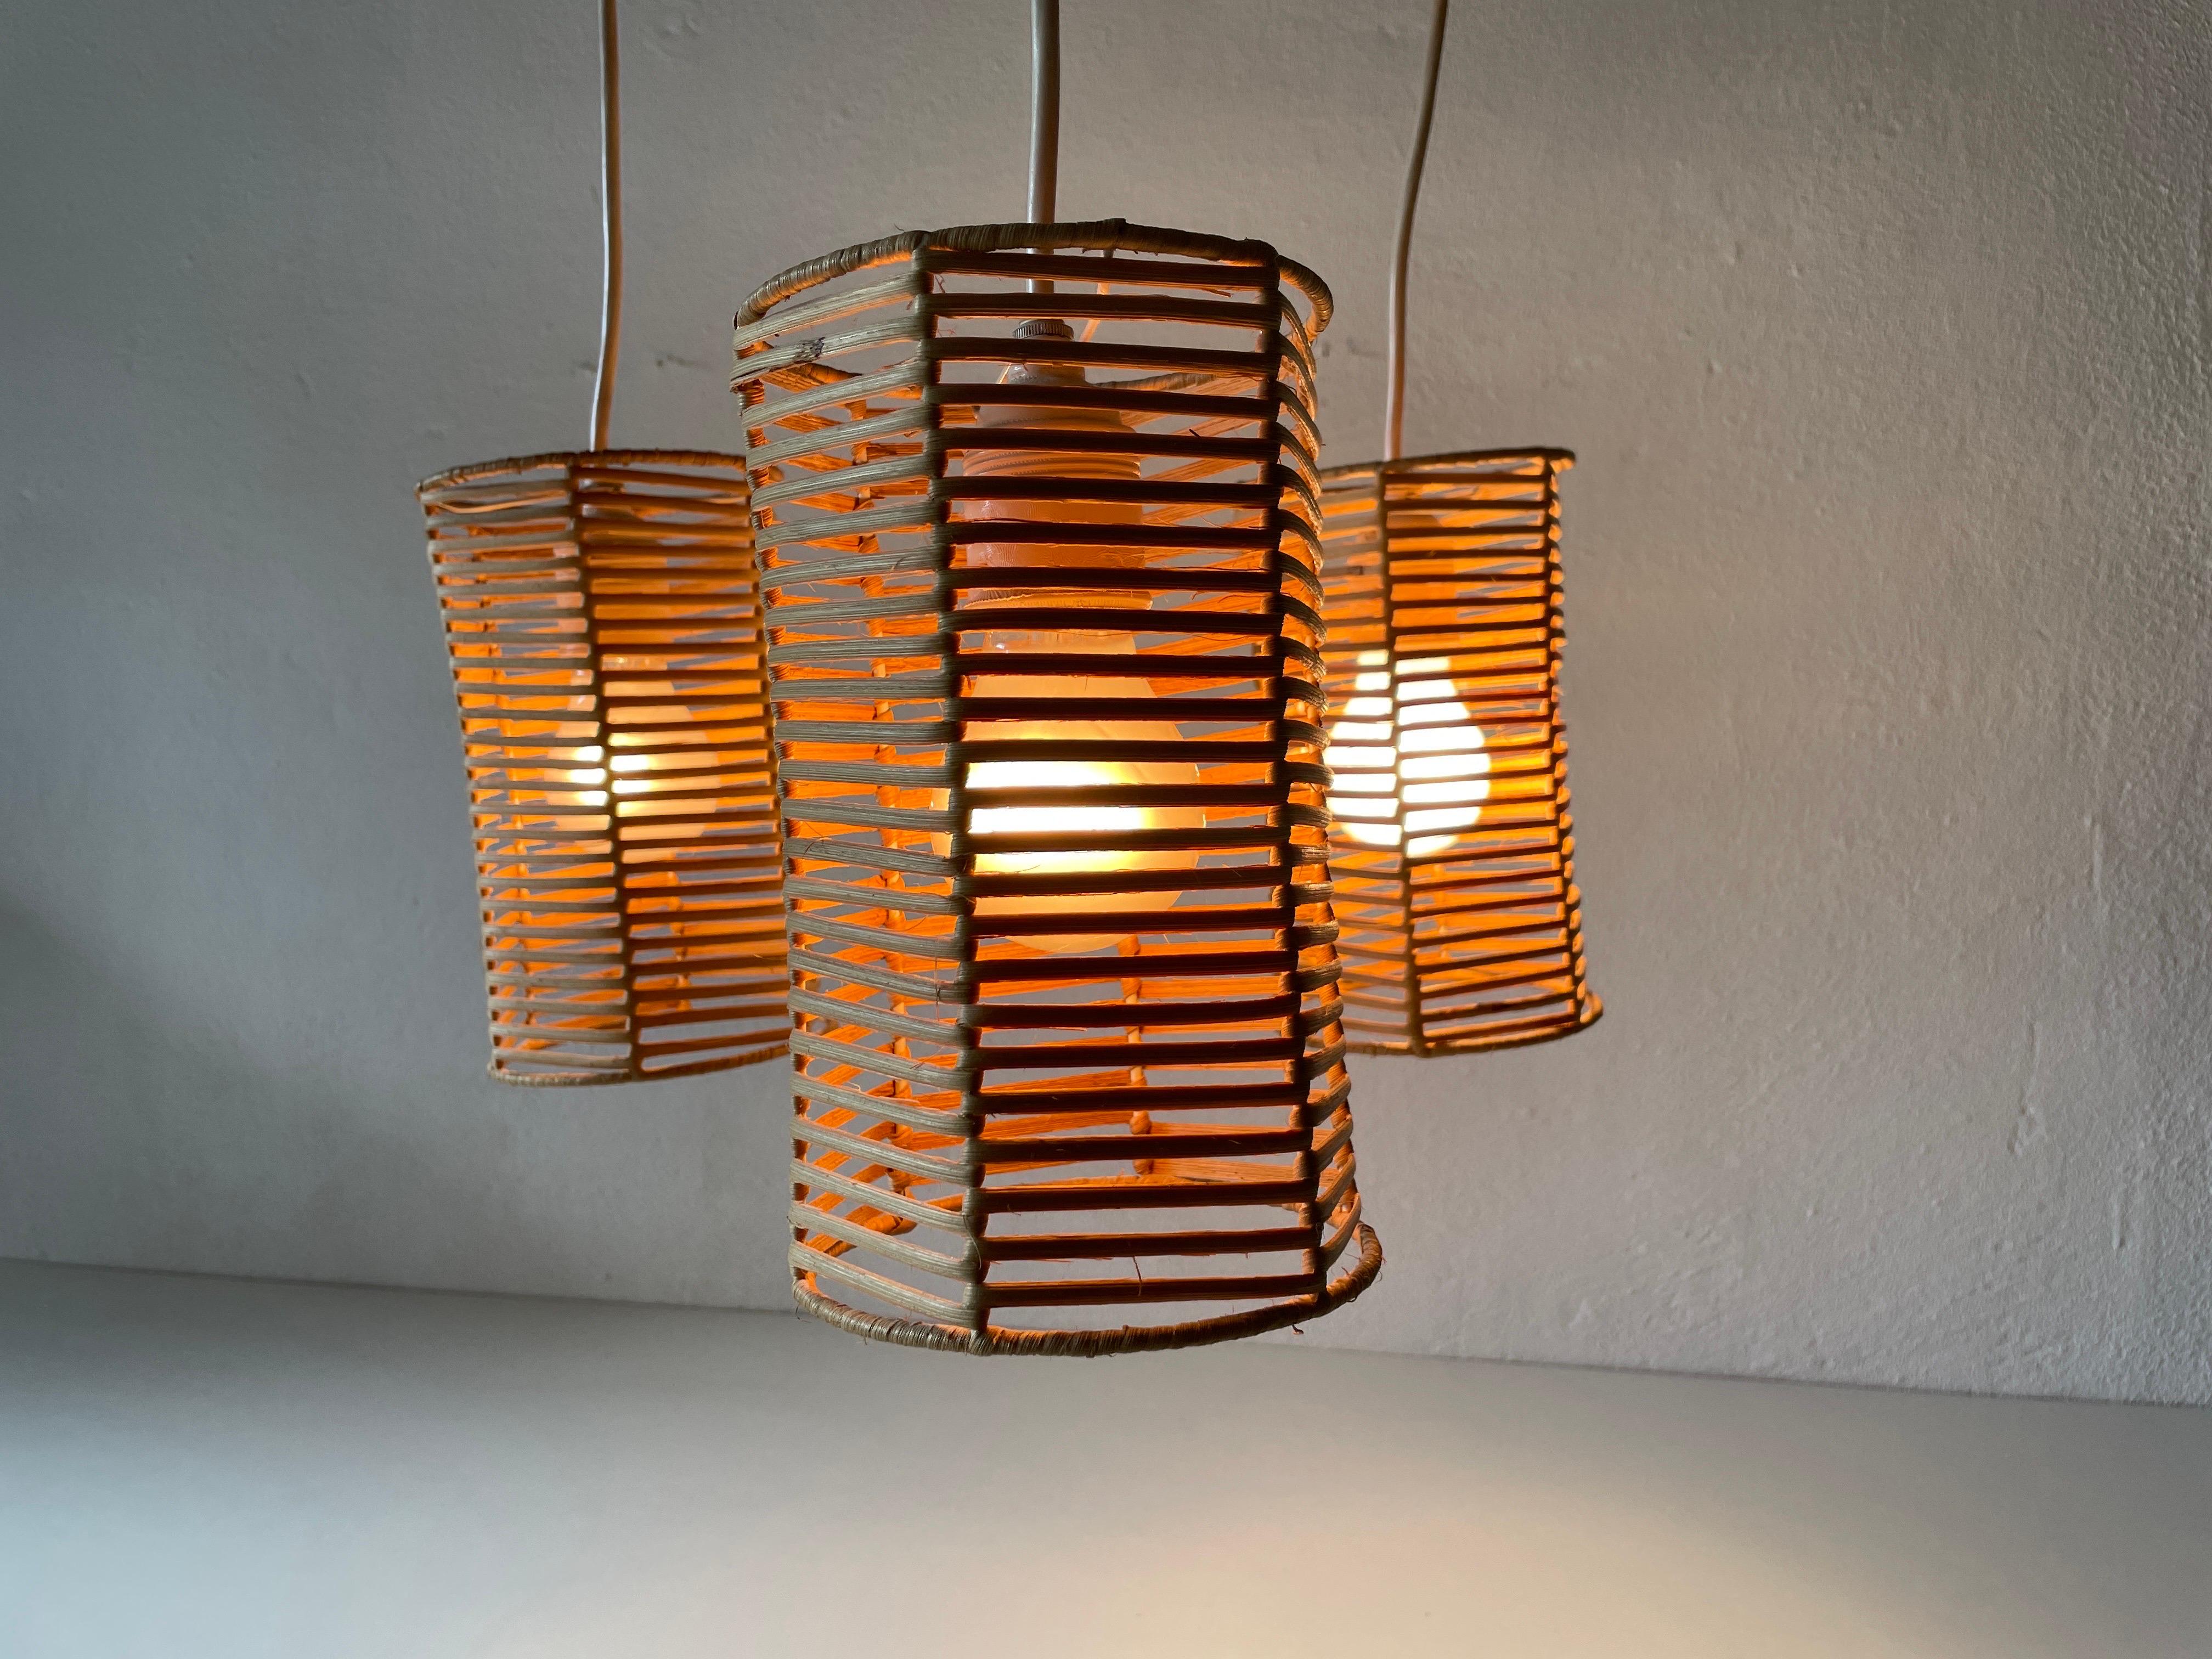 Triple Shade Wicker and Wood Pendant Lamp, 1960s, Germany For Sale 10